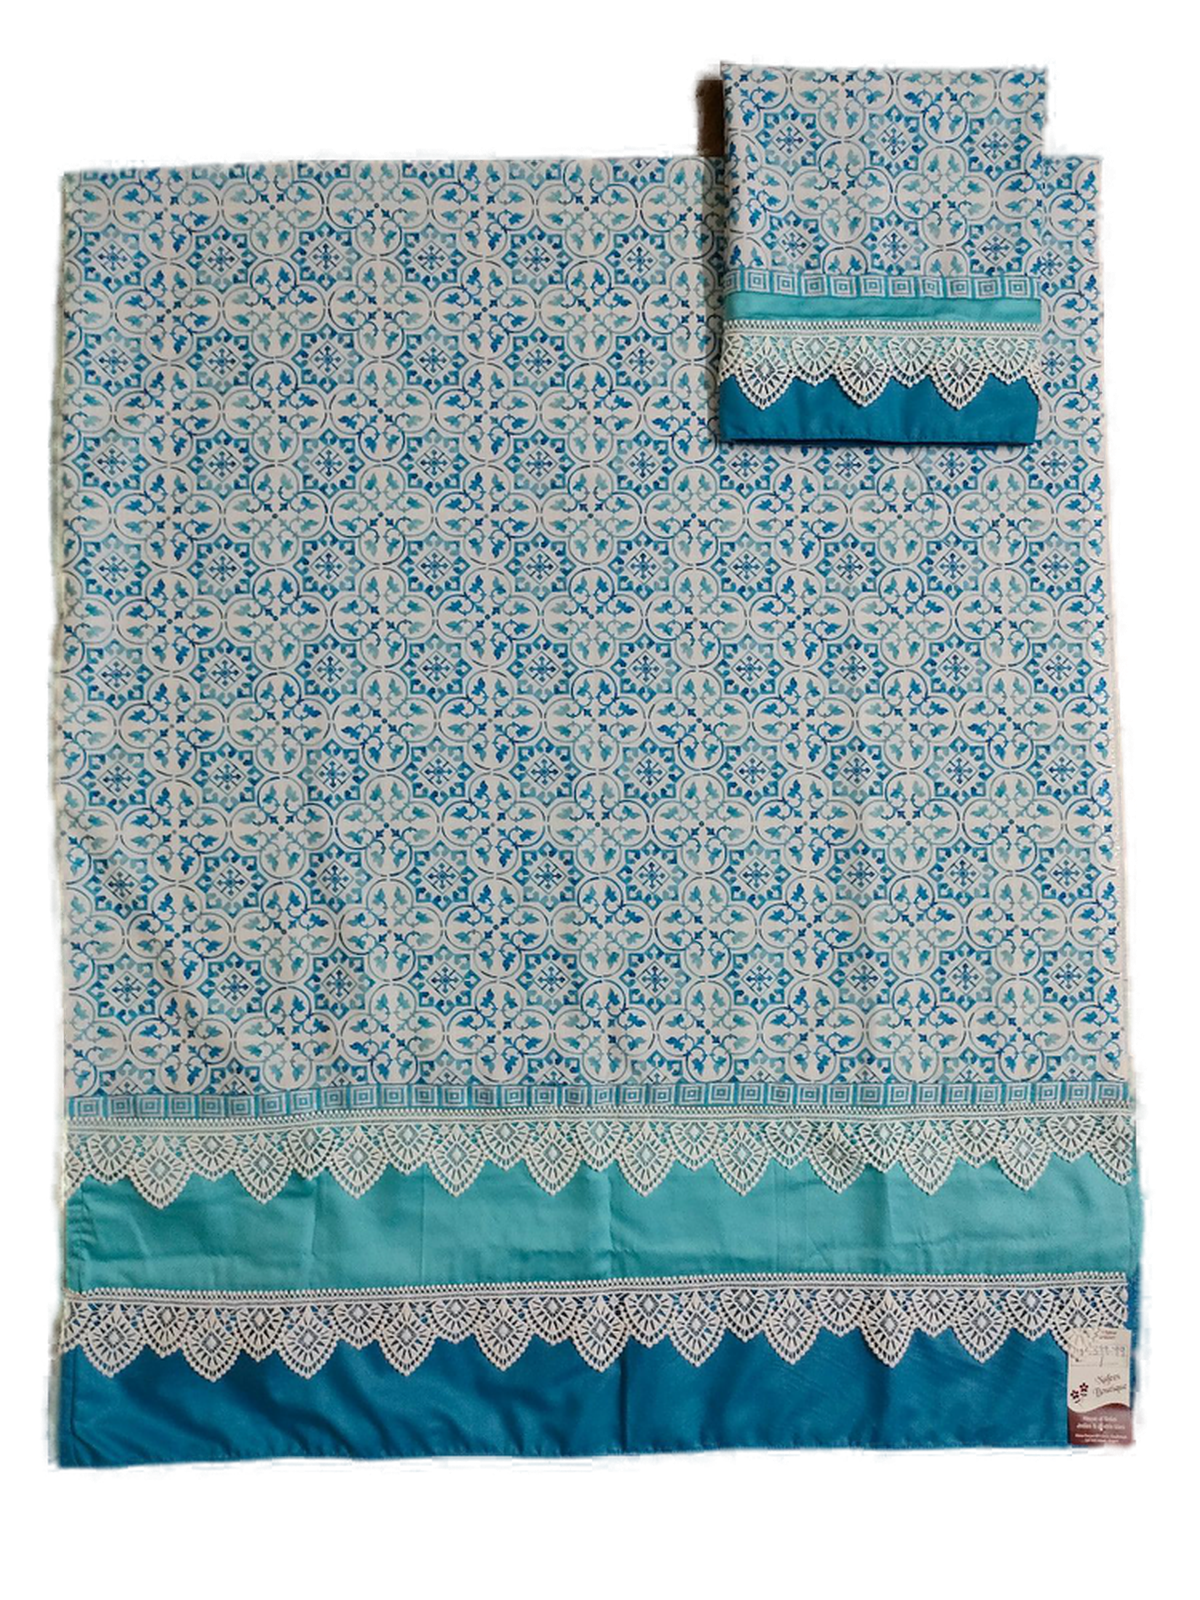 Blue & White Patterned Rida with White & Cyan Lace